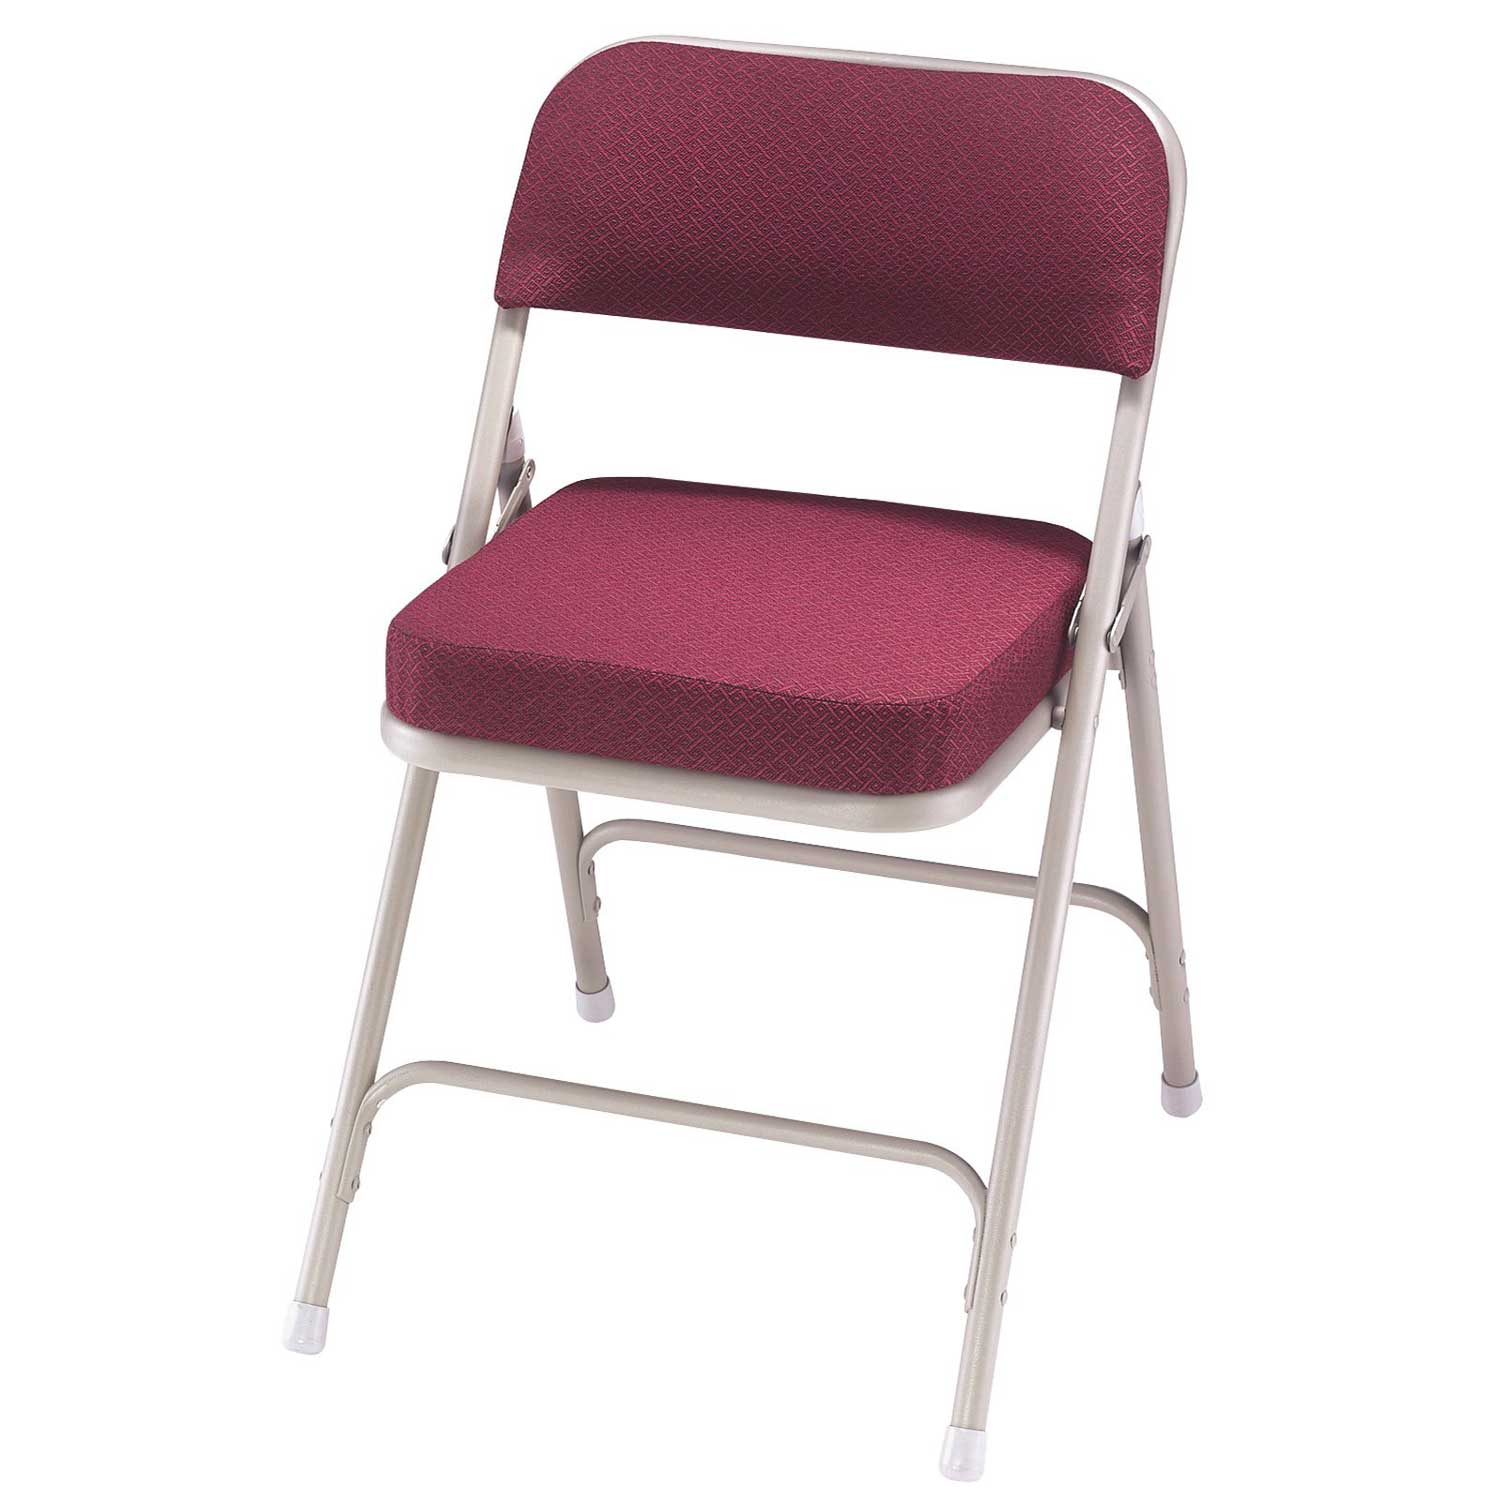 Untitled Walmart Recalls Card Table And Chair Sets After